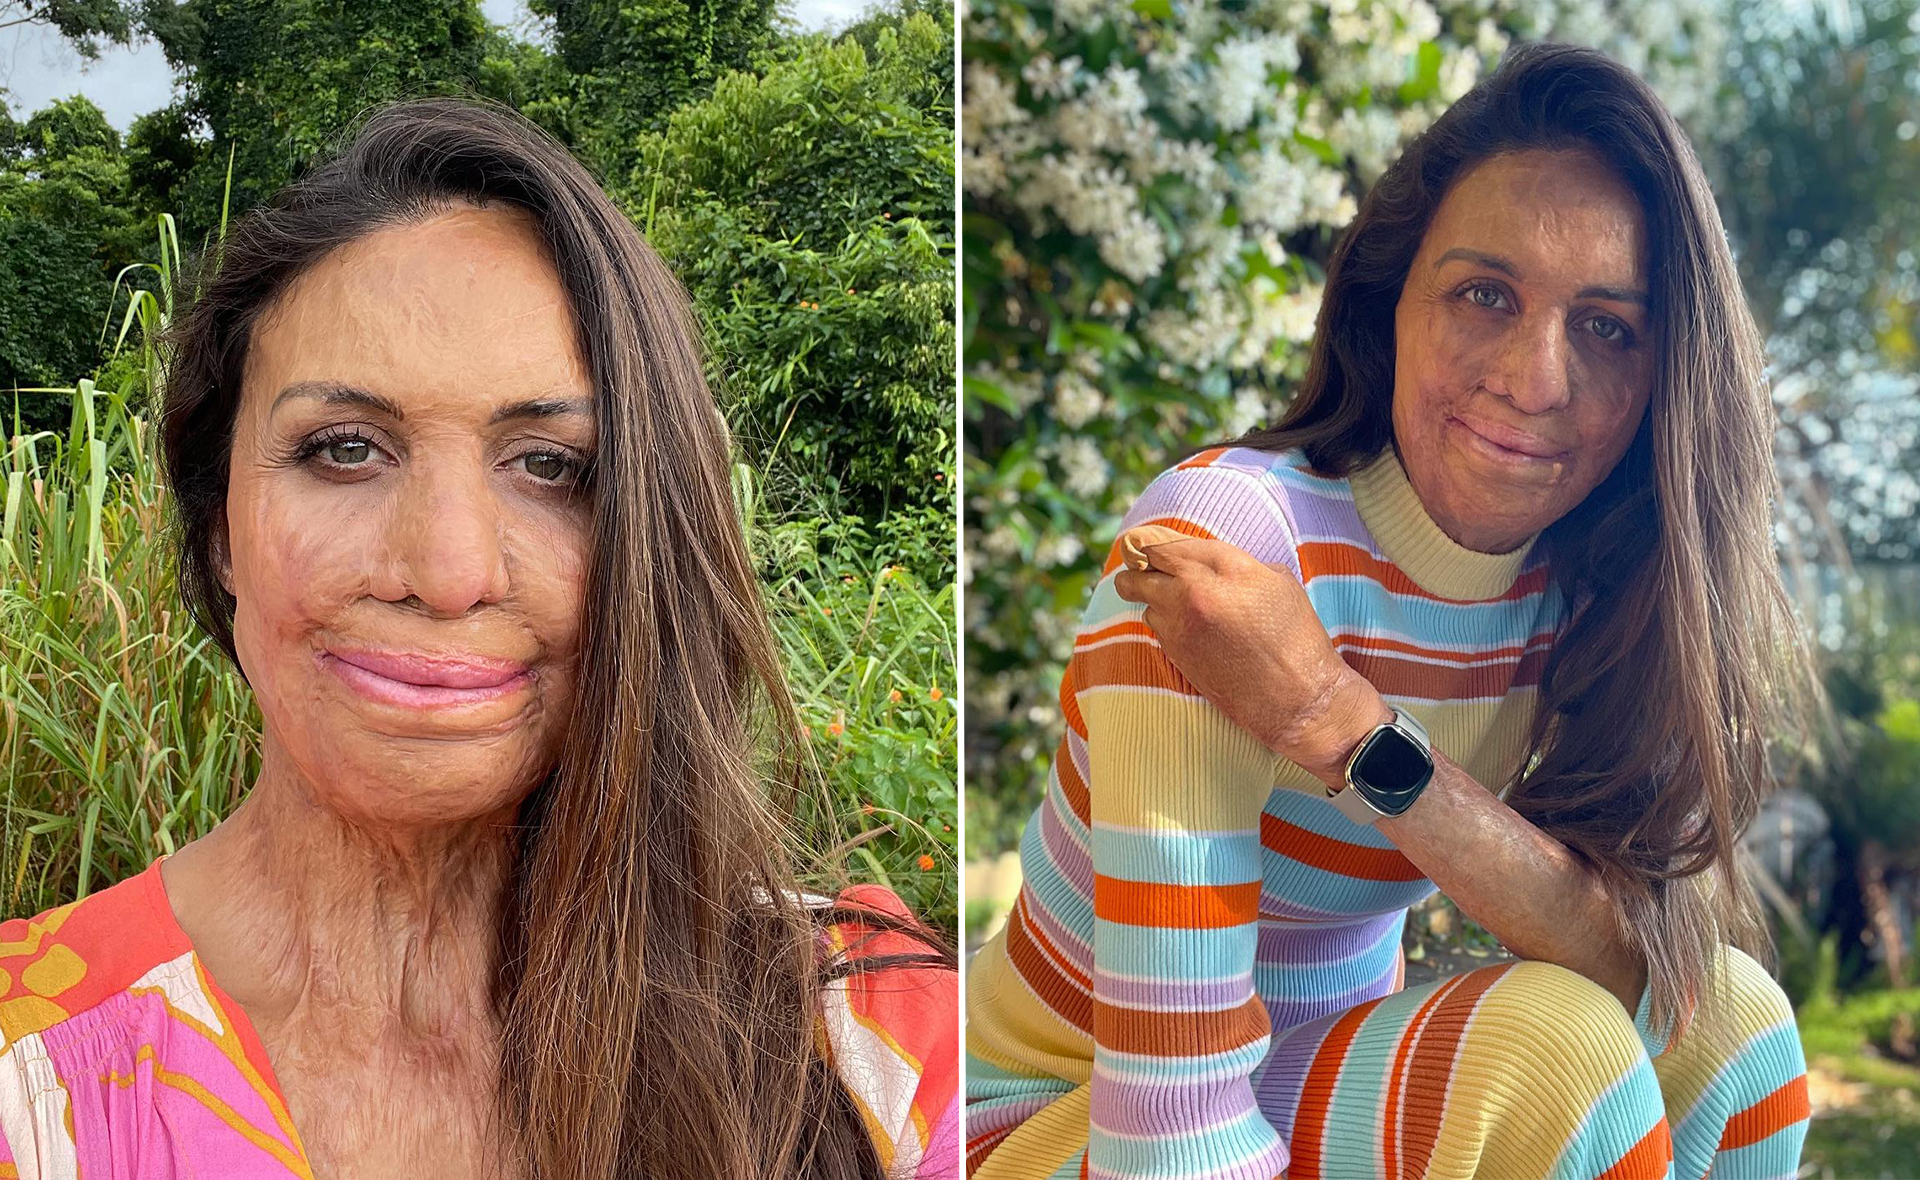 Turia Pitt’s touching message of hope to those affected by floods and the war in Ukraine